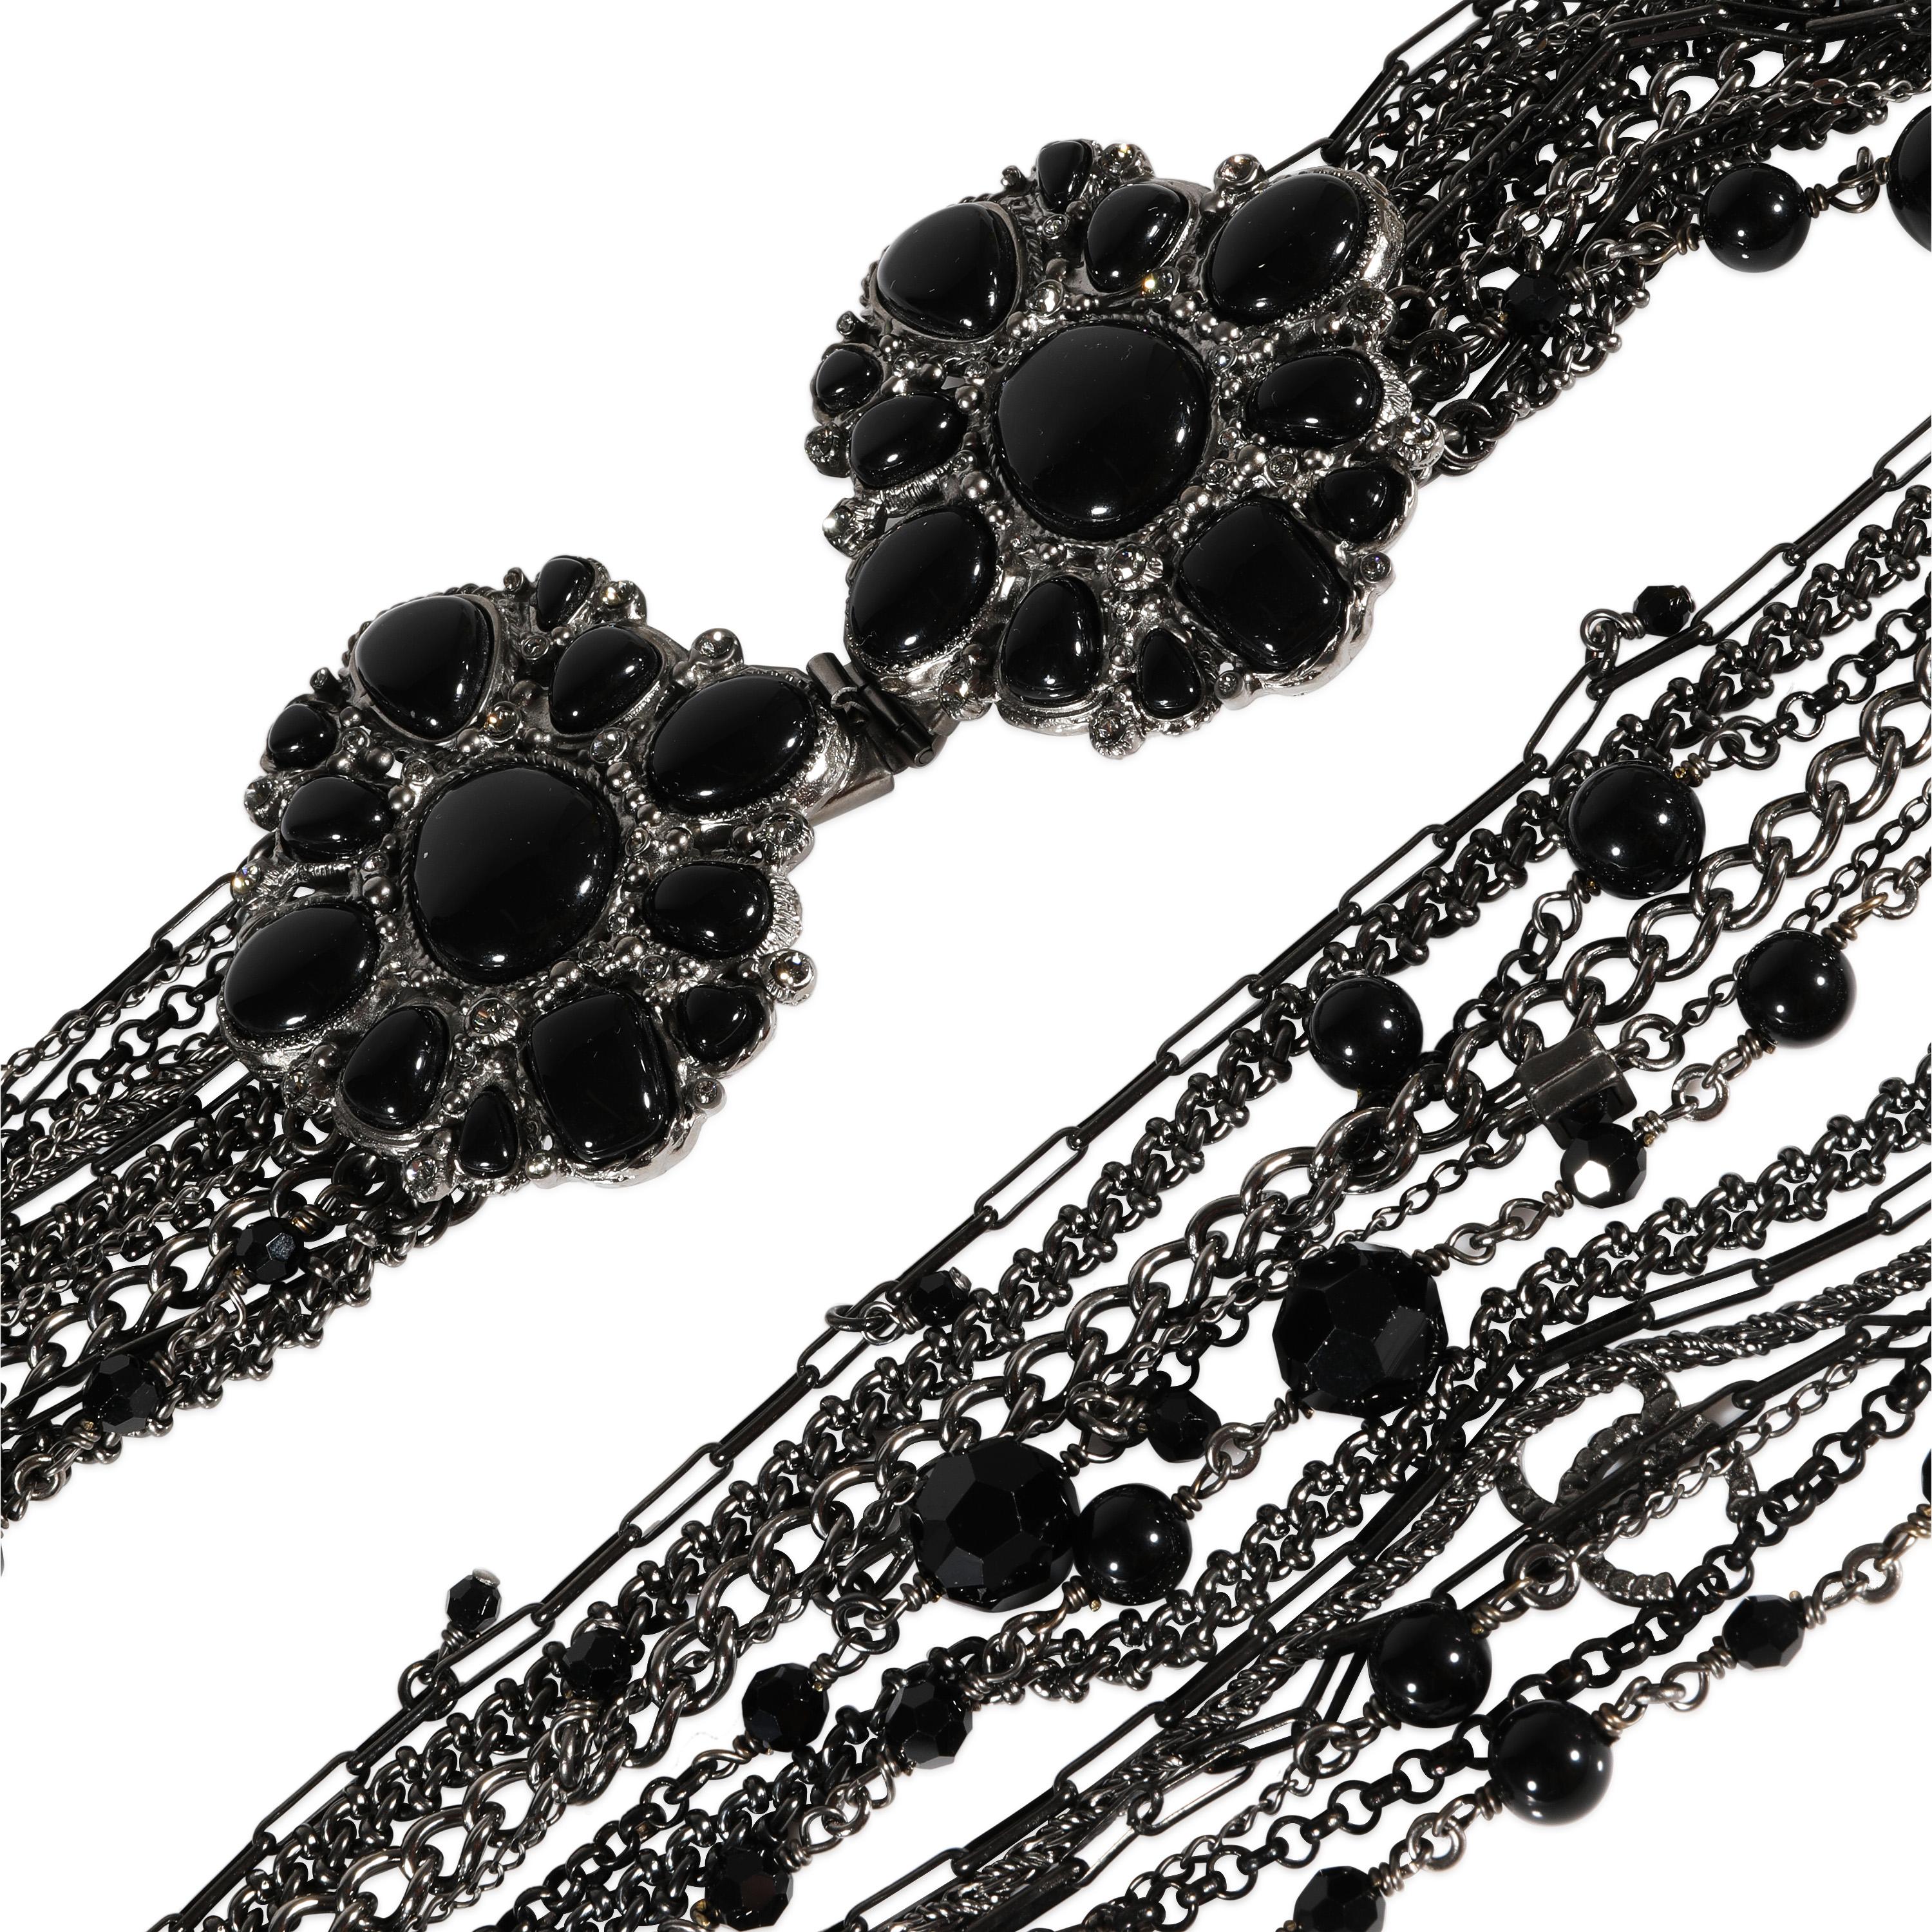 Chanel Spring 2009 Double Brooch Chain With Black Gripox & Strass

PRIMARY DETAILS
SKU: 123219
Listing Title: Chanel Spring 2009 Double Brooch Chain With Black Gripox & Strass
Condition Description: Retails for 2500 USD. In excellent condition. 24